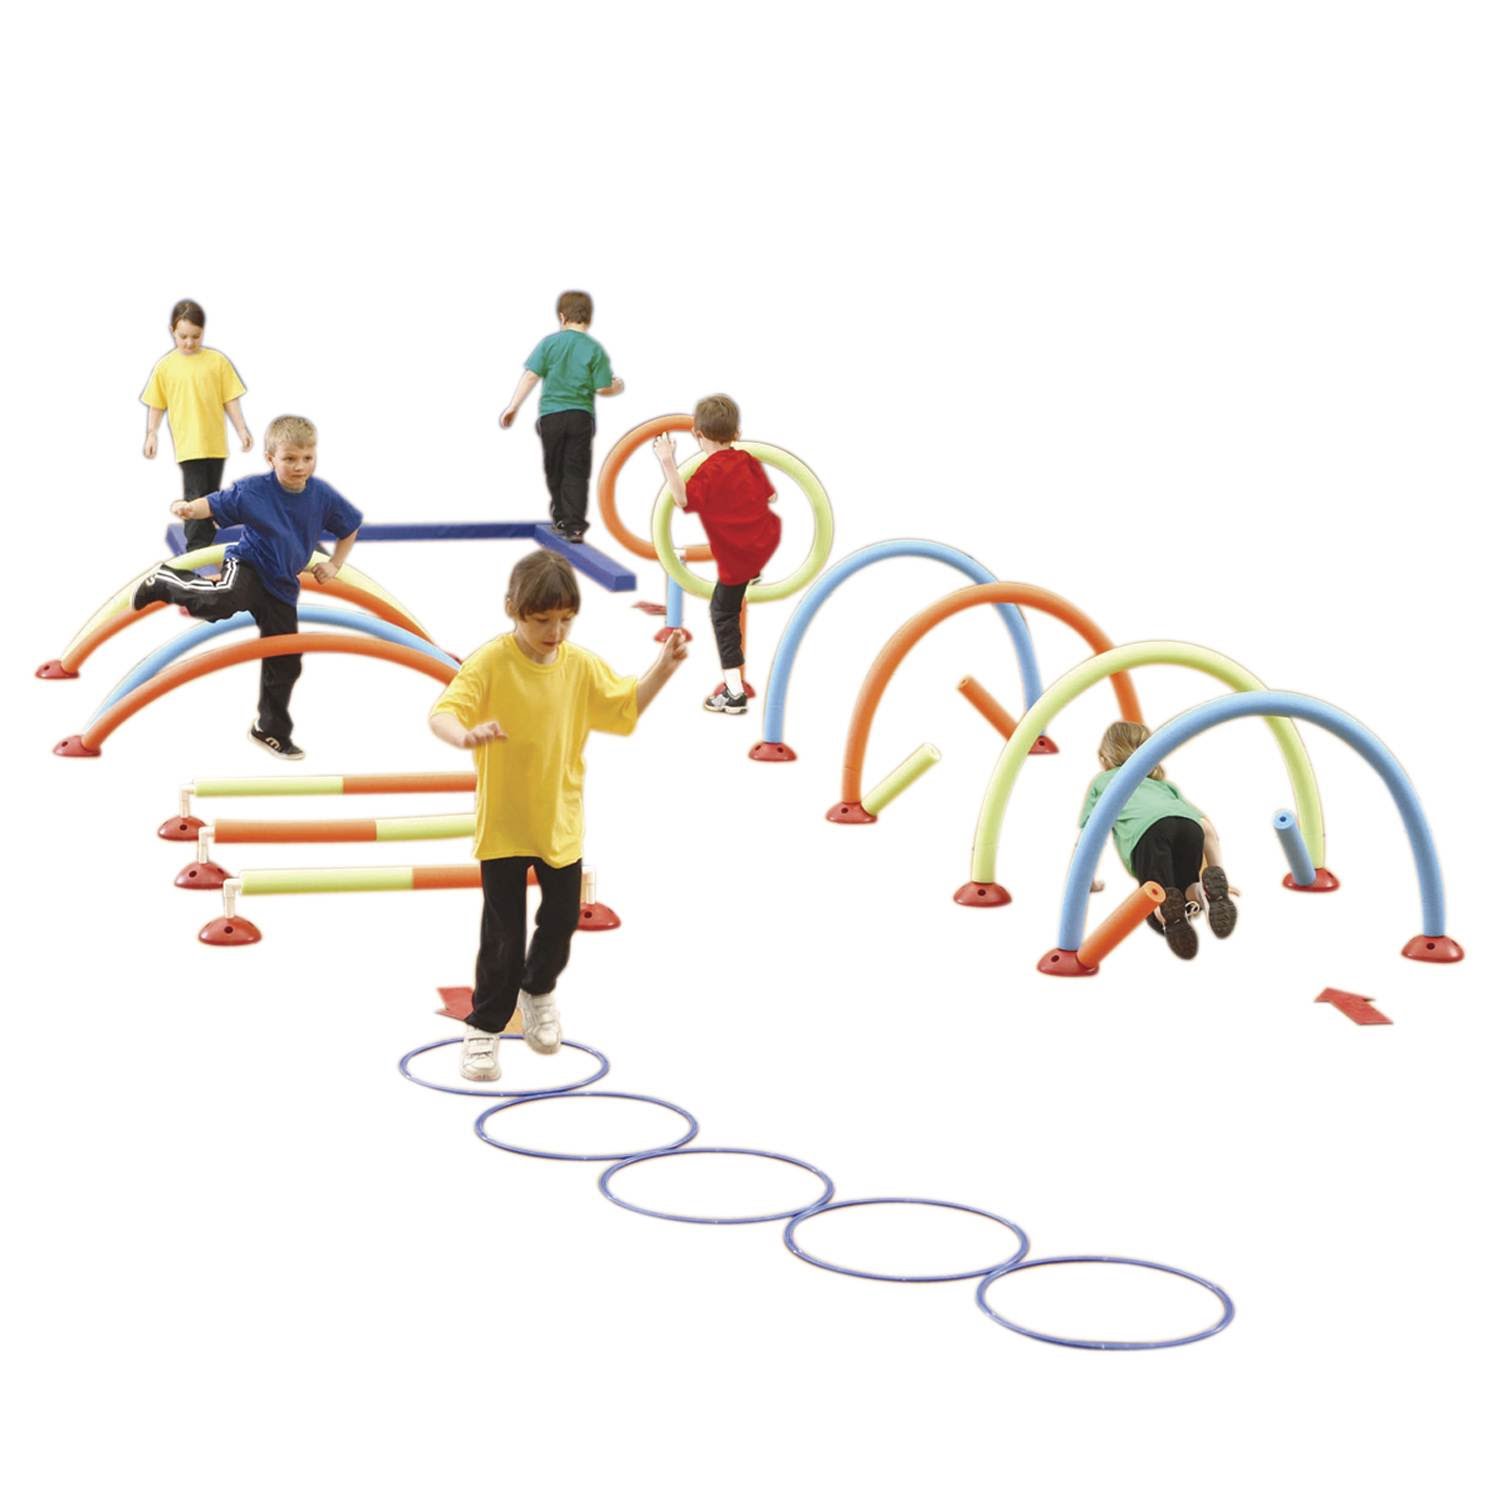 WeeKidz Challenge Course, Includes: Includes 20 Red Bases, 28 Foam Noodles, 3 Balance Beams, 6 Rings, 61 Connectors, 10 Vinyl Arrows And Canvas Storage Bag